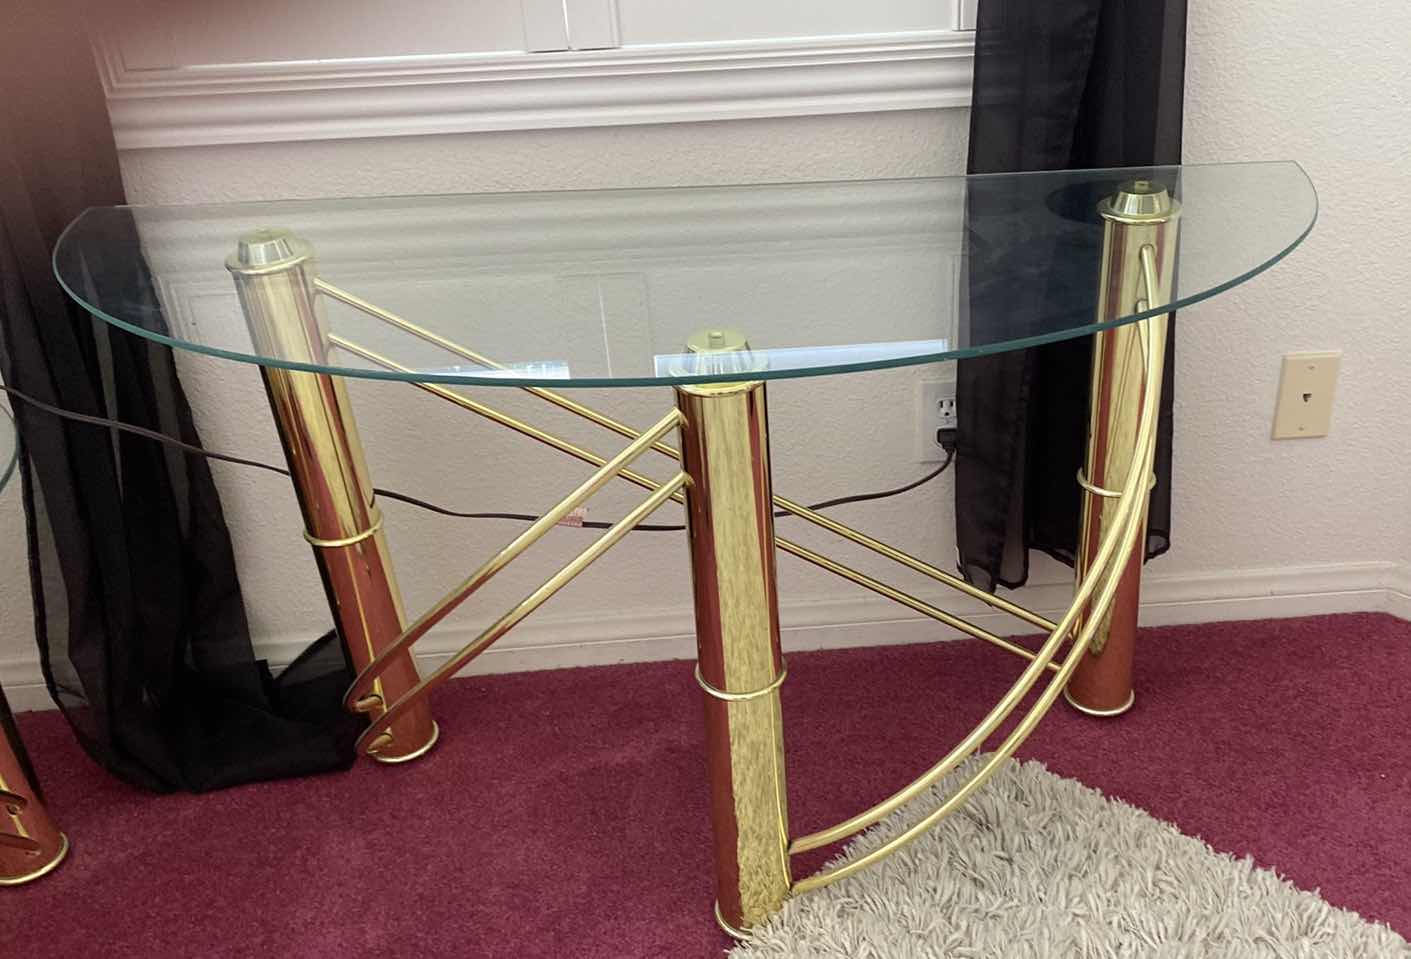 Photo 1 of POLISHED GOLD METAL CONSOLE TABLE WITH GLASS TOP 48“ x 18“ H 26”